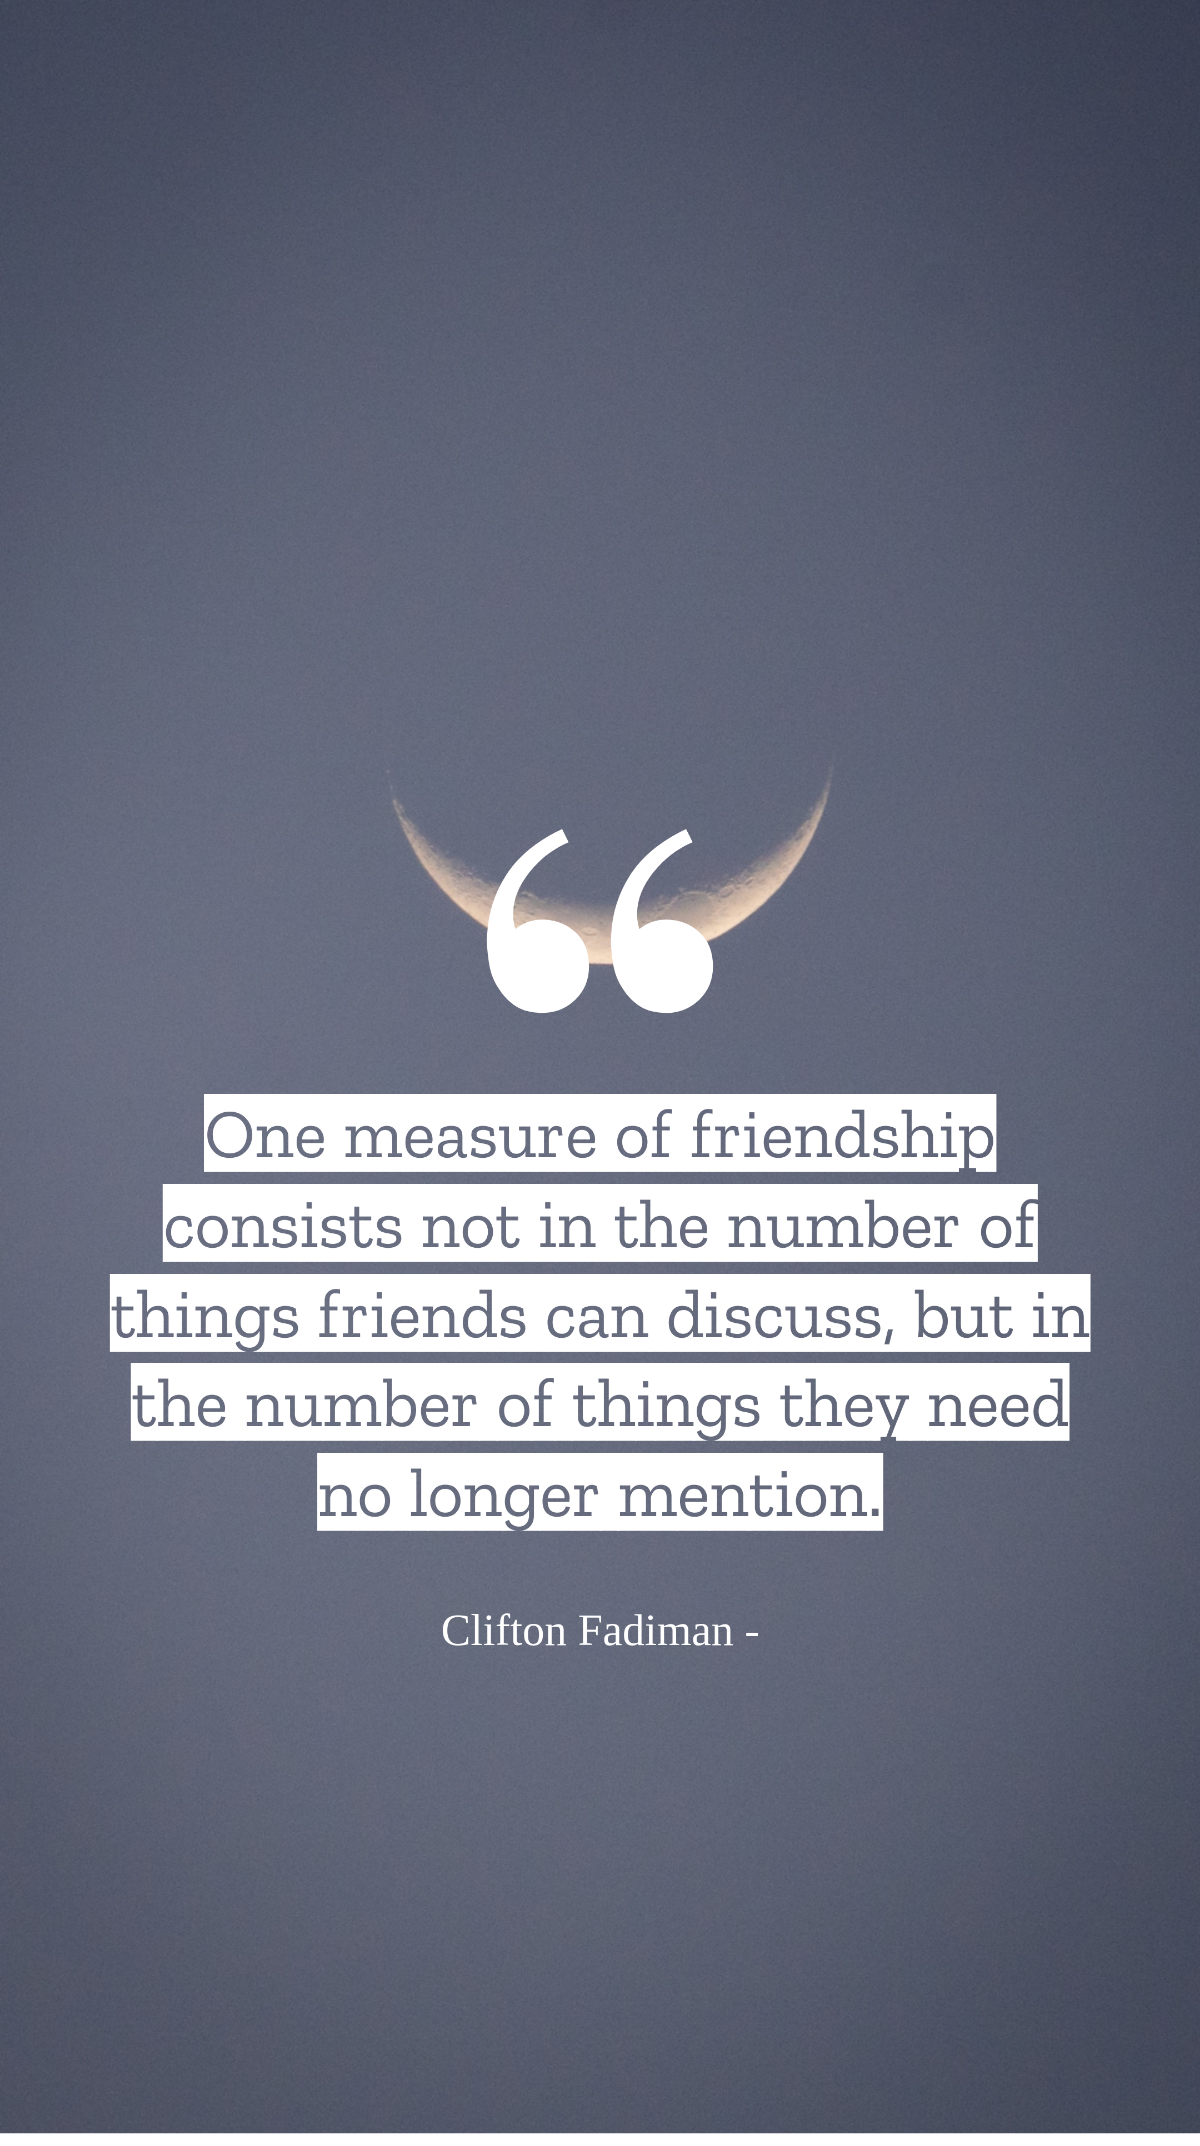 Clifton Fadiman - One measure of friendship consists not in the number of things friends can discuss, but in the number of things they need no longer mention. Template